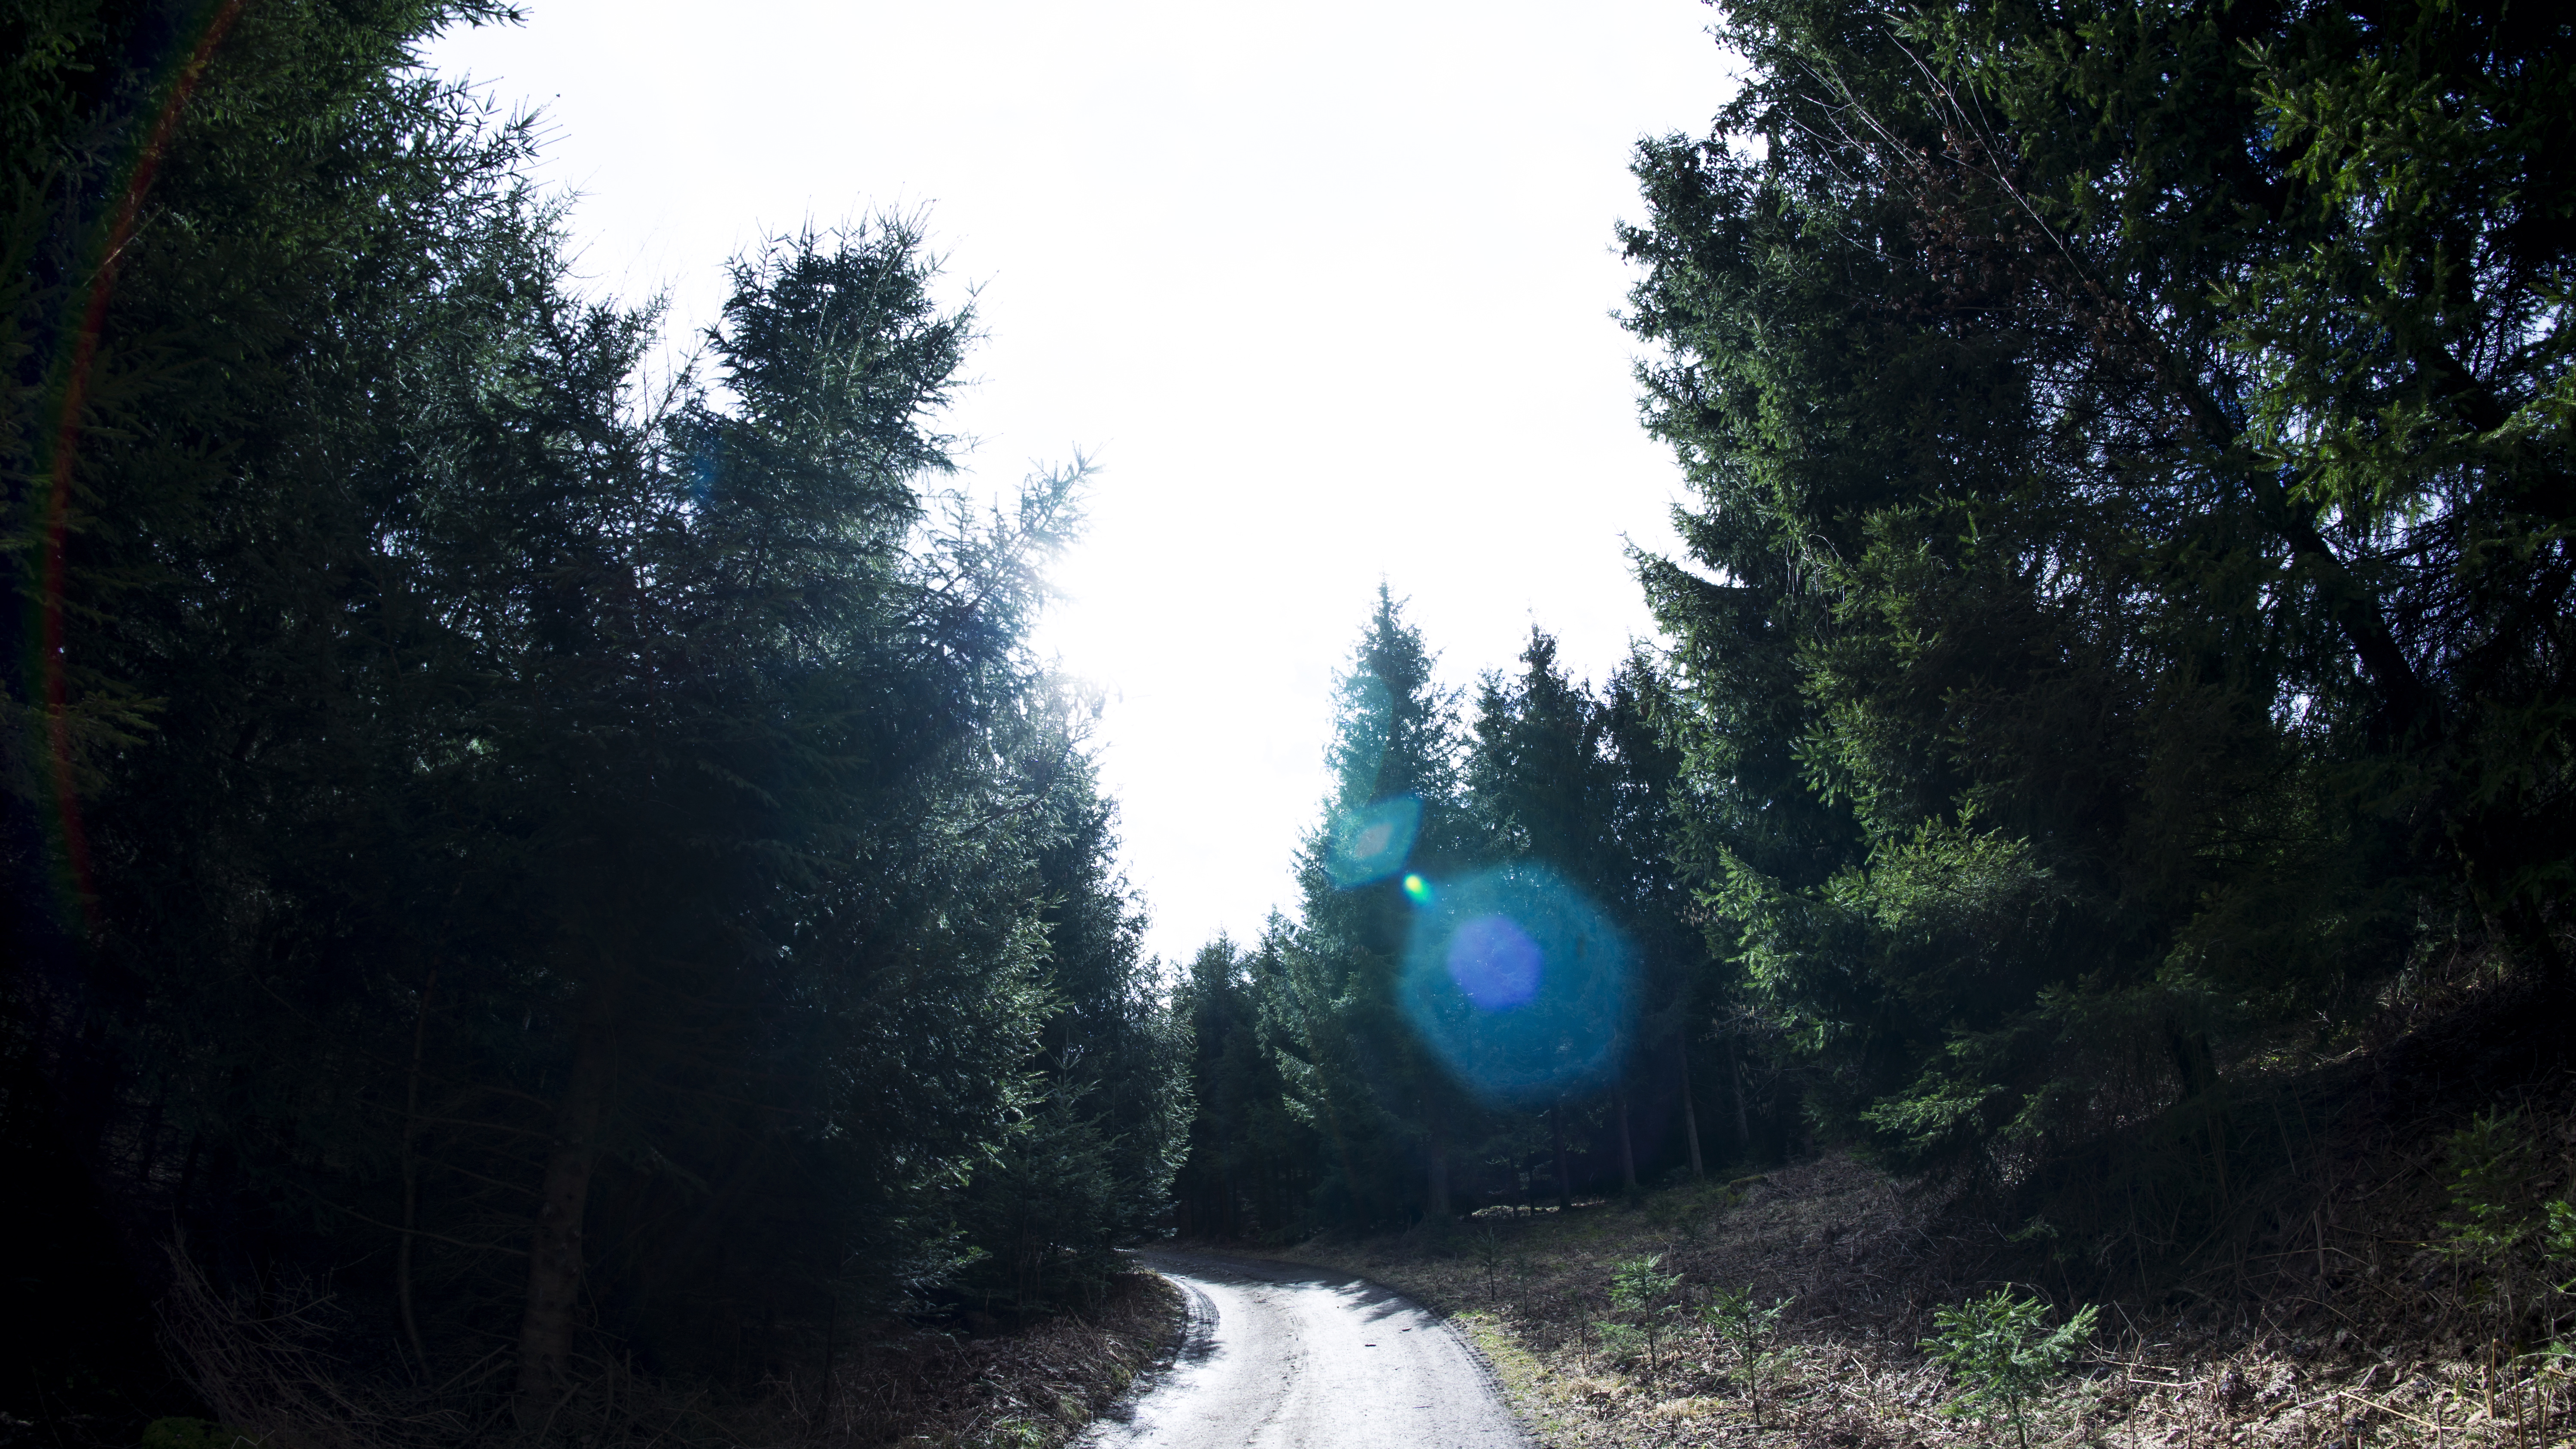 General 6000x3376 nature trees forest lens flare road wood lights